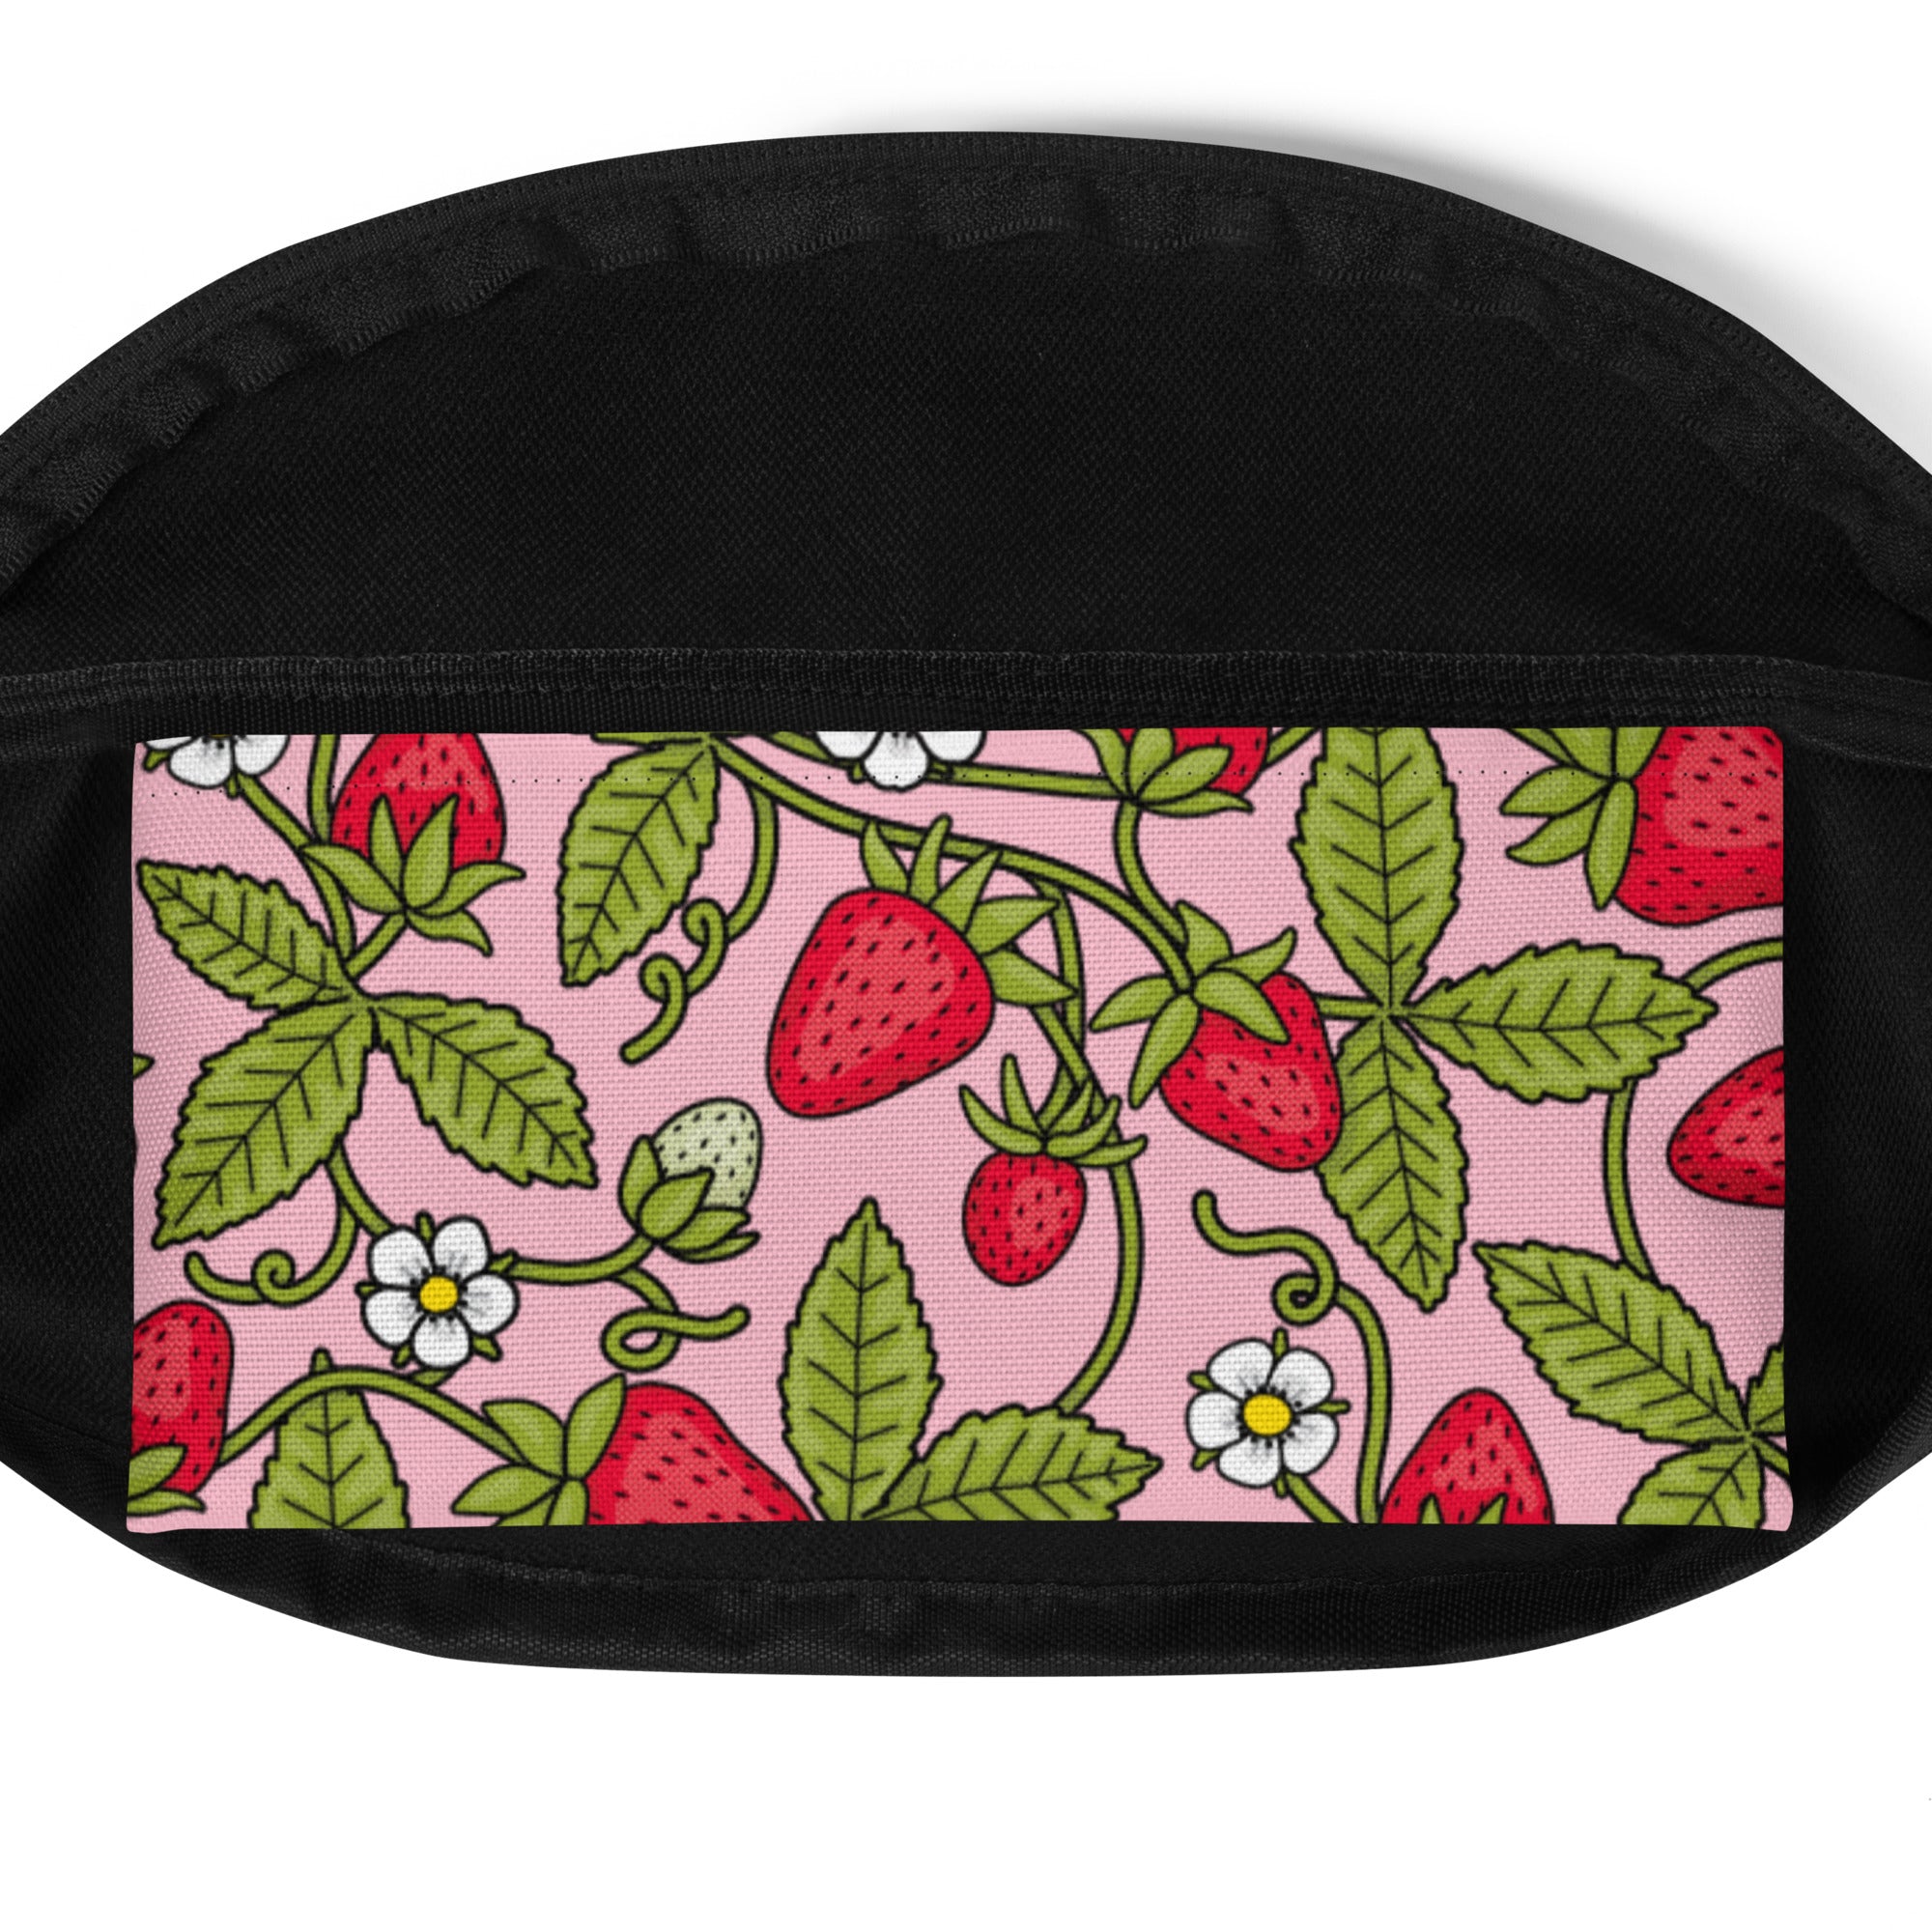 Strawberry Fanny Pack